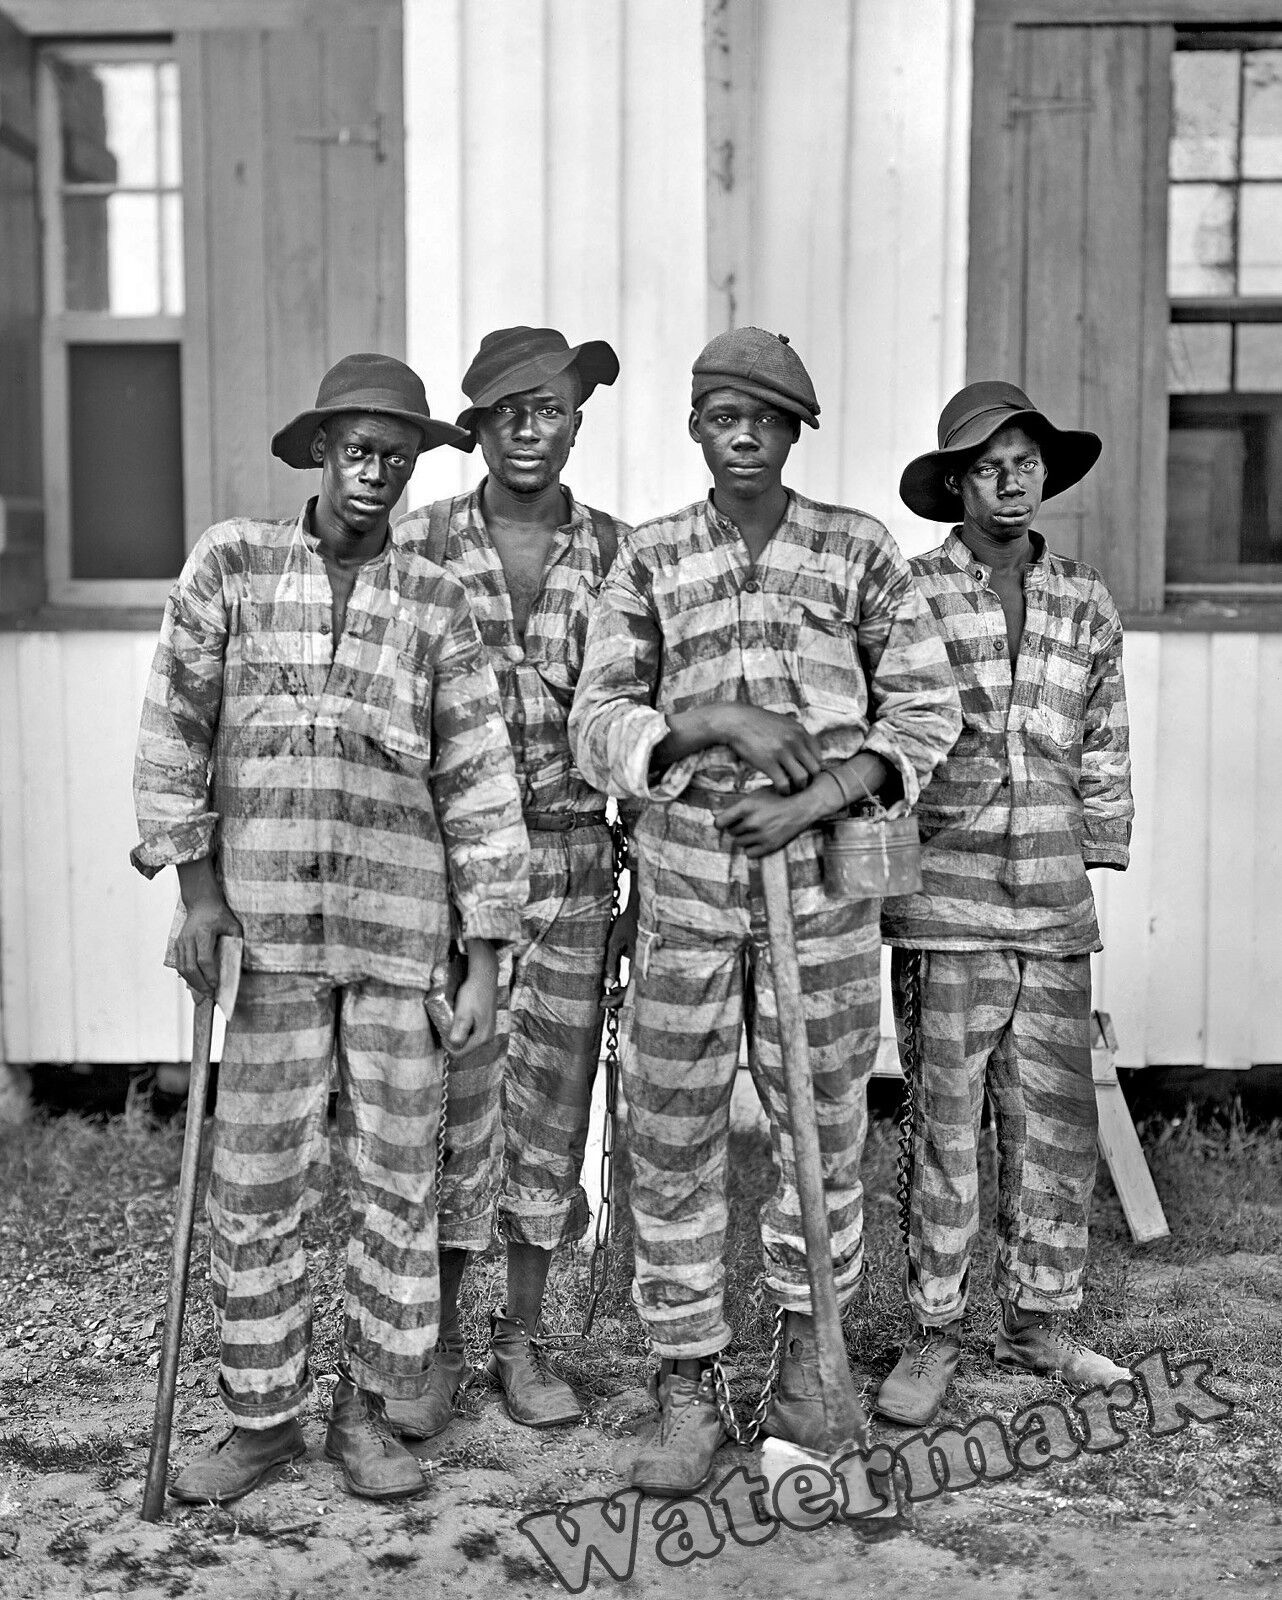 Photograph of Southern Chain Gang Convict Members  Year 1905c   8x10